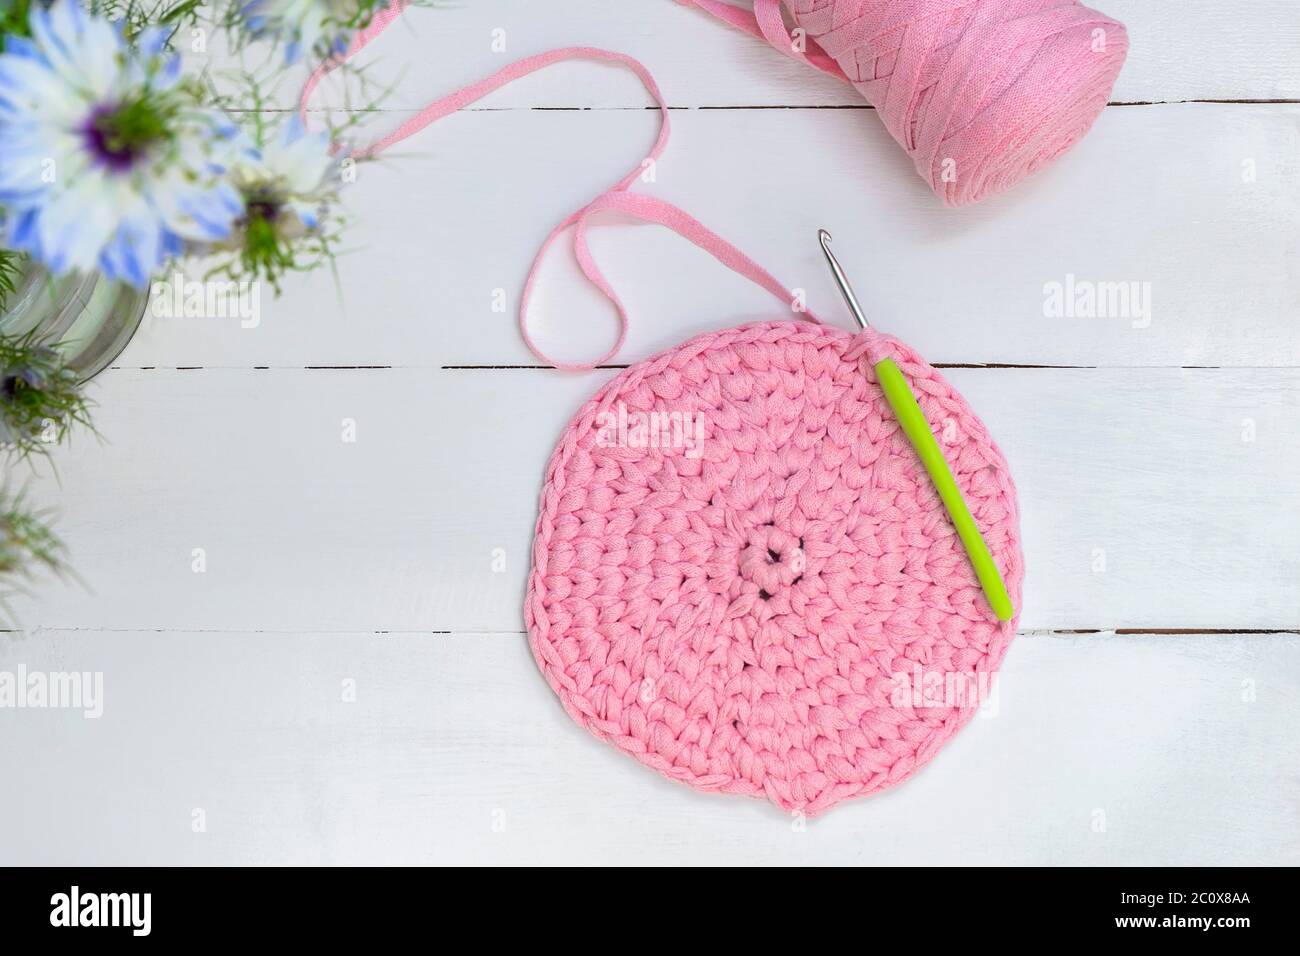 Crocheting and home hobby concept. Top view of crochet work with crochet hook and pink yarn on white wooden table Stock Photo